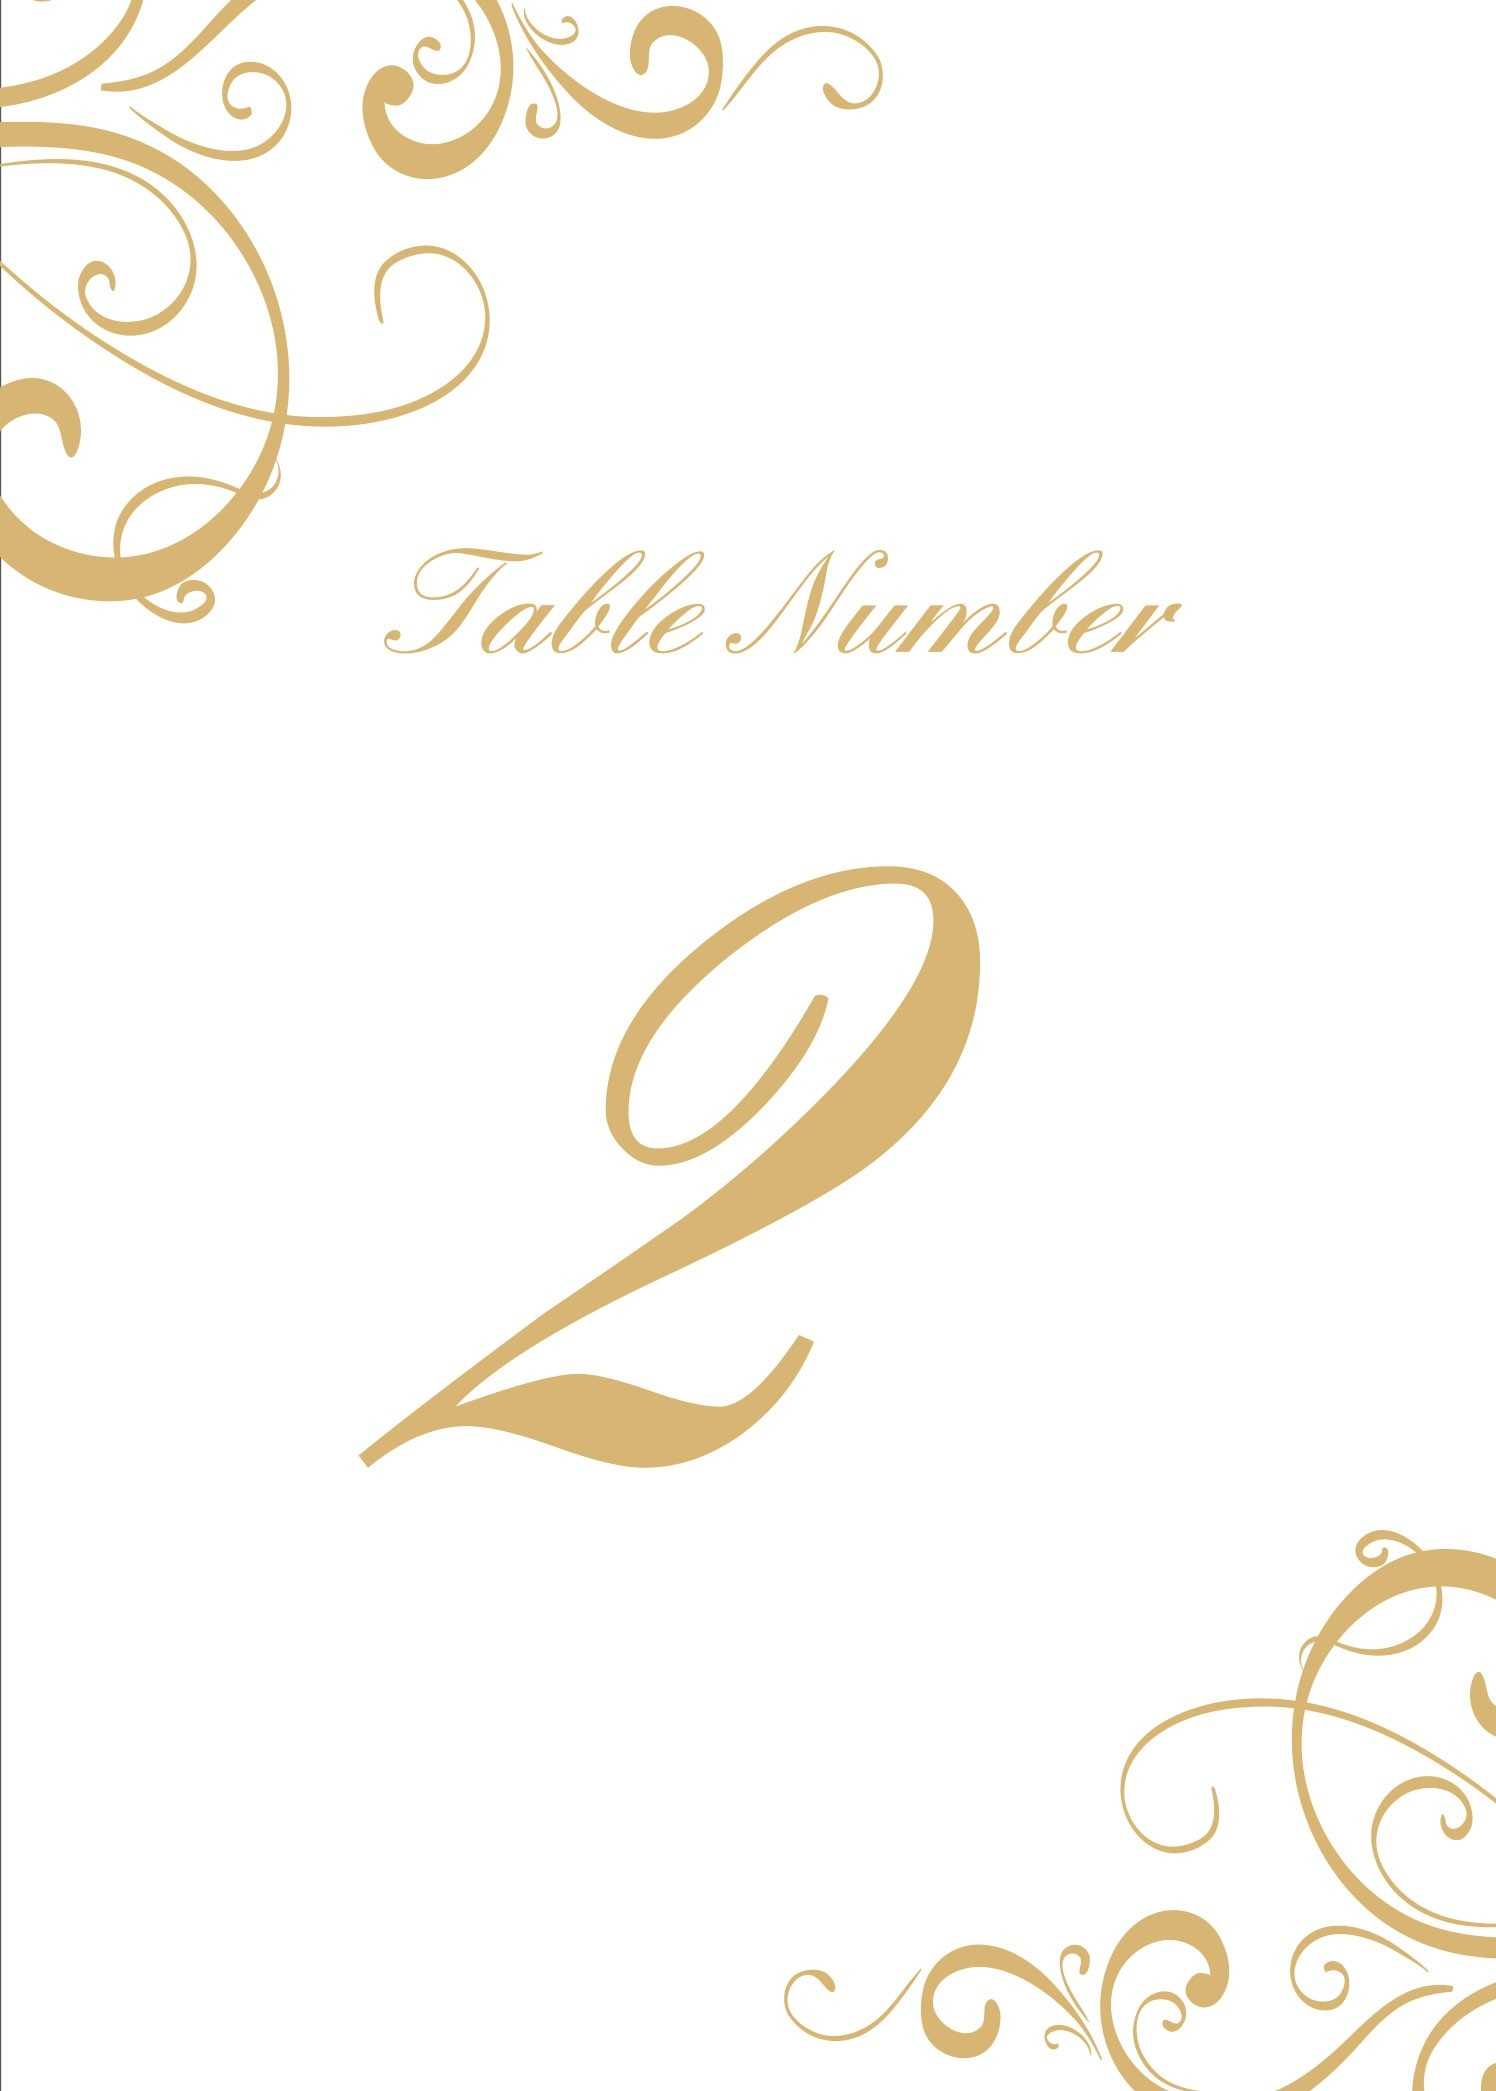 Wedding Table Numbers | Printable Pdfbasic Invite Inside Table Number Cards Template